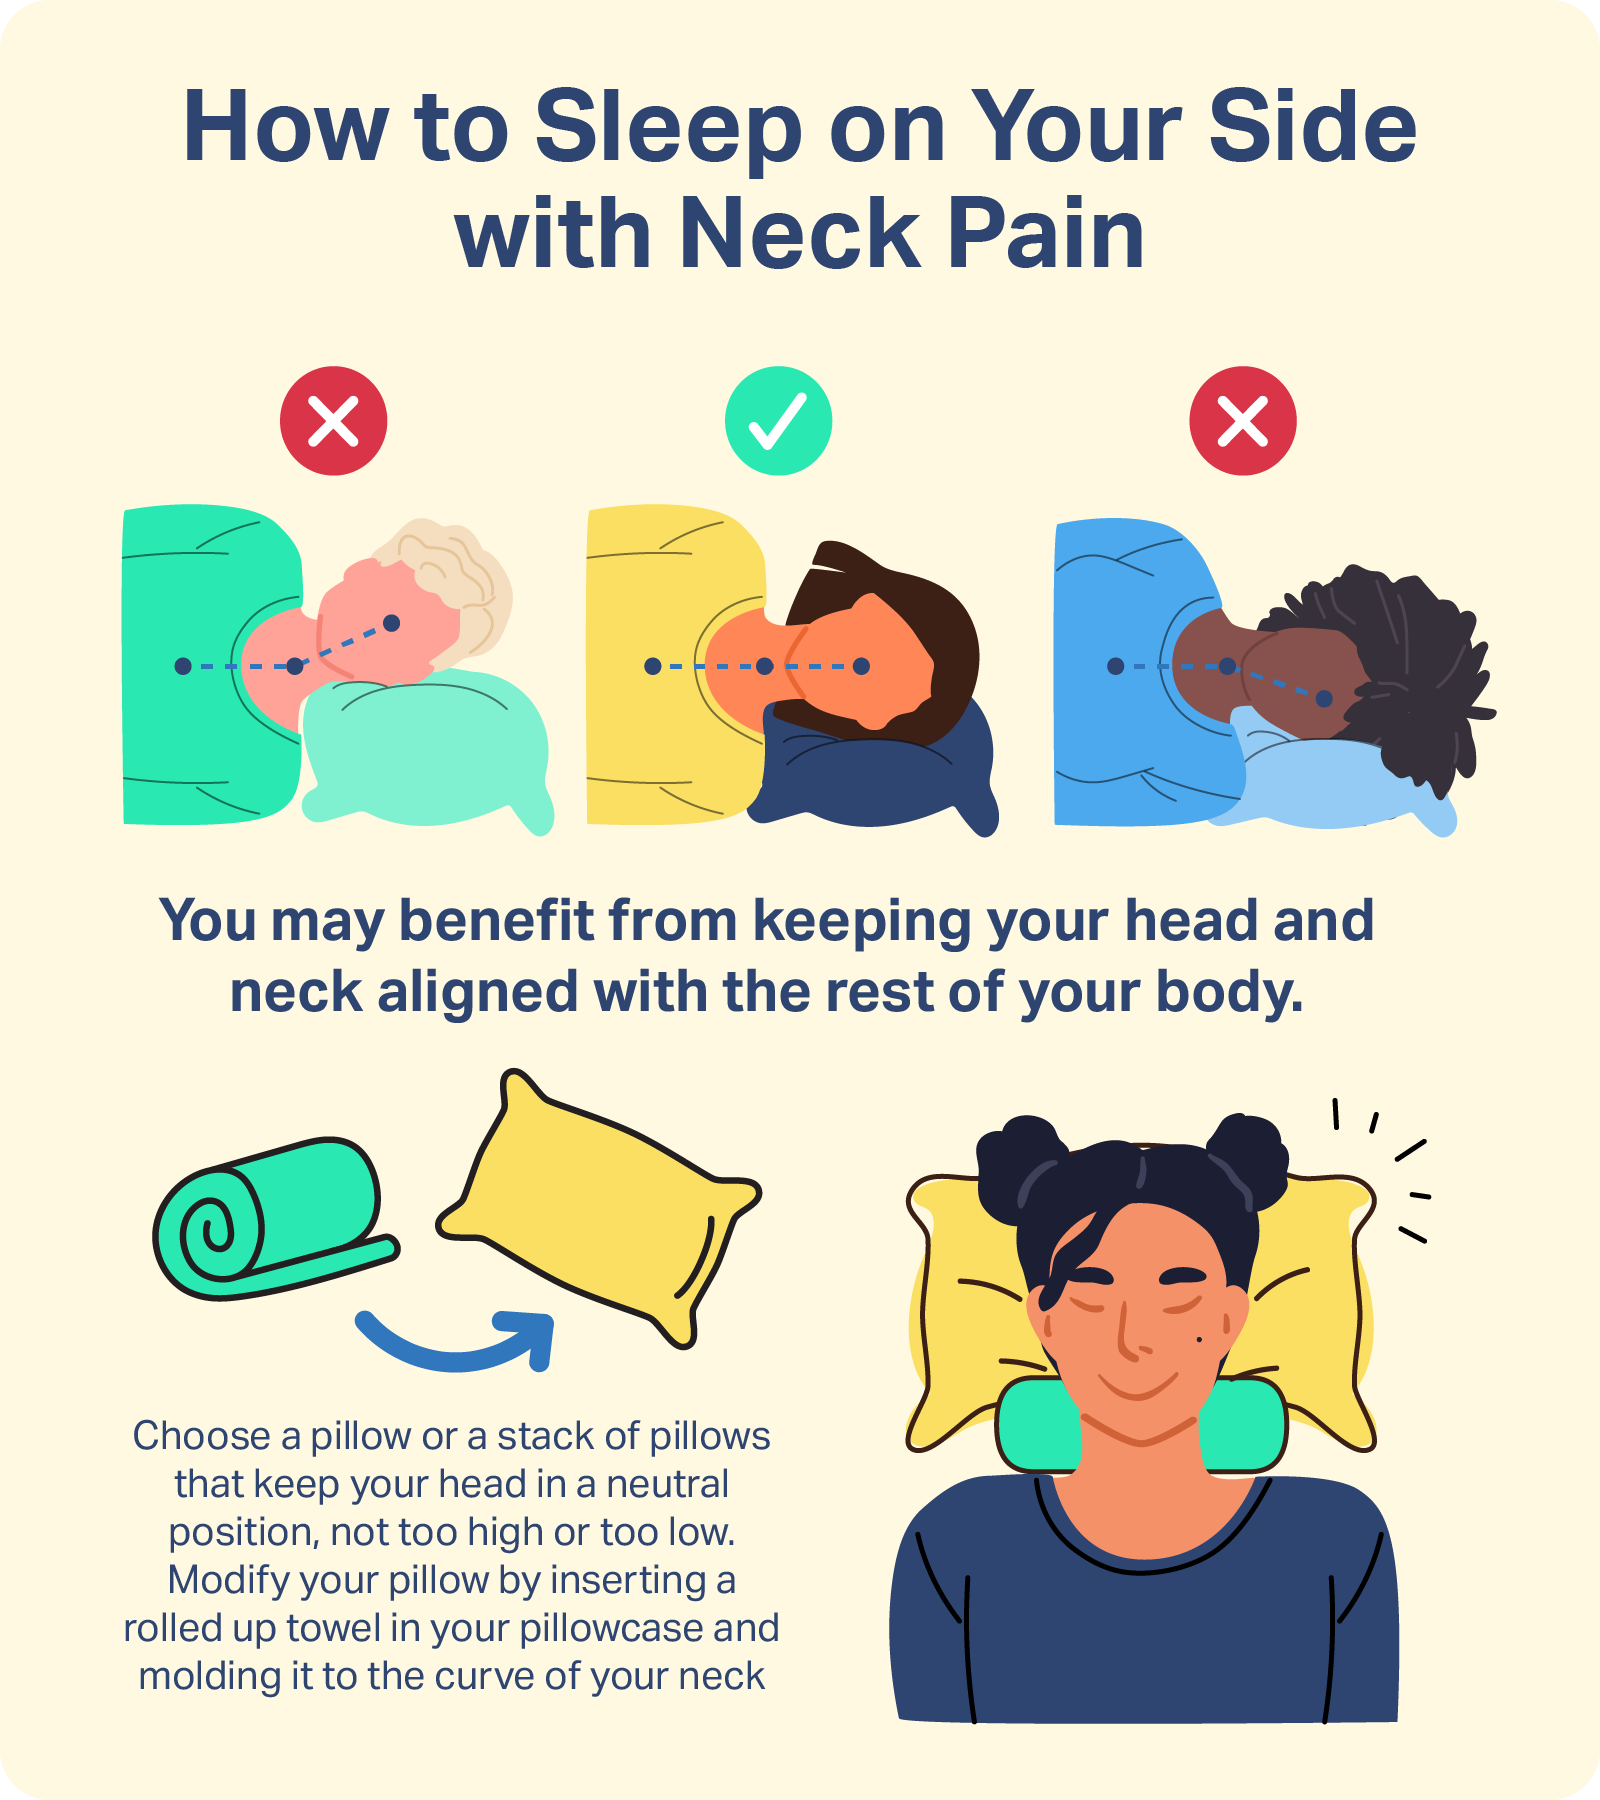 How to Choose the Best Sleeping Position for Neck Pain | Sleep Foundation